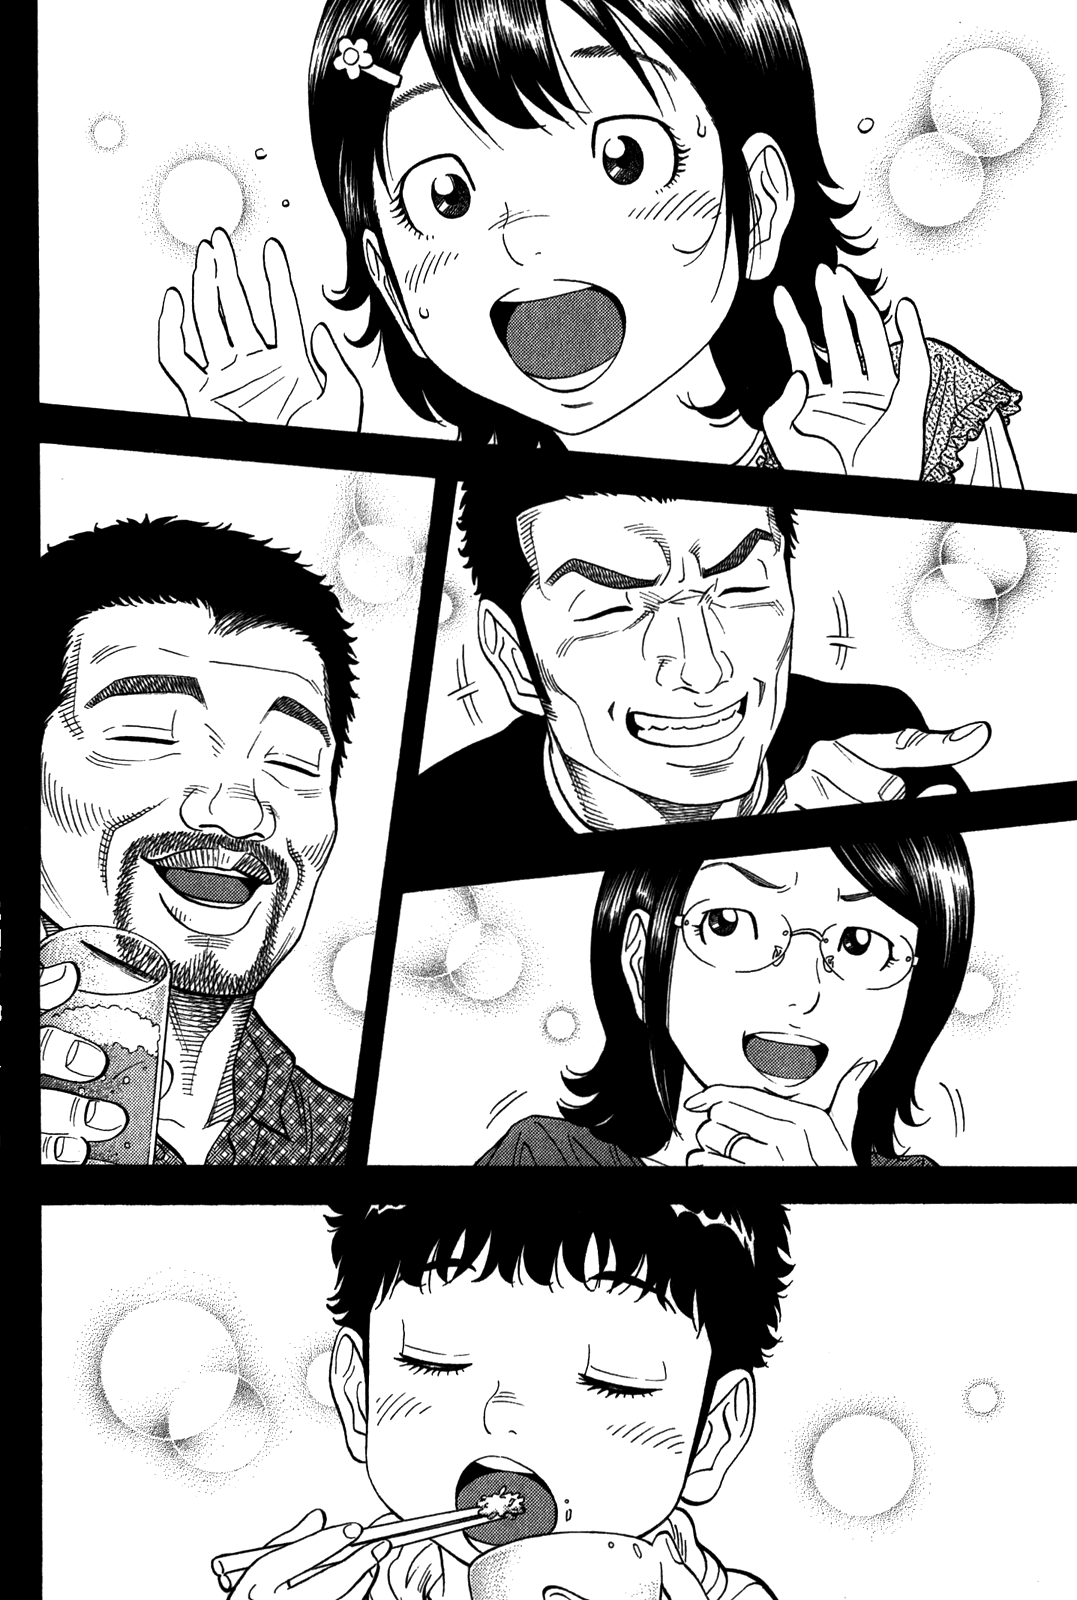 Montage (WATANABE Jun) Vol.10 Chapter 94: Family